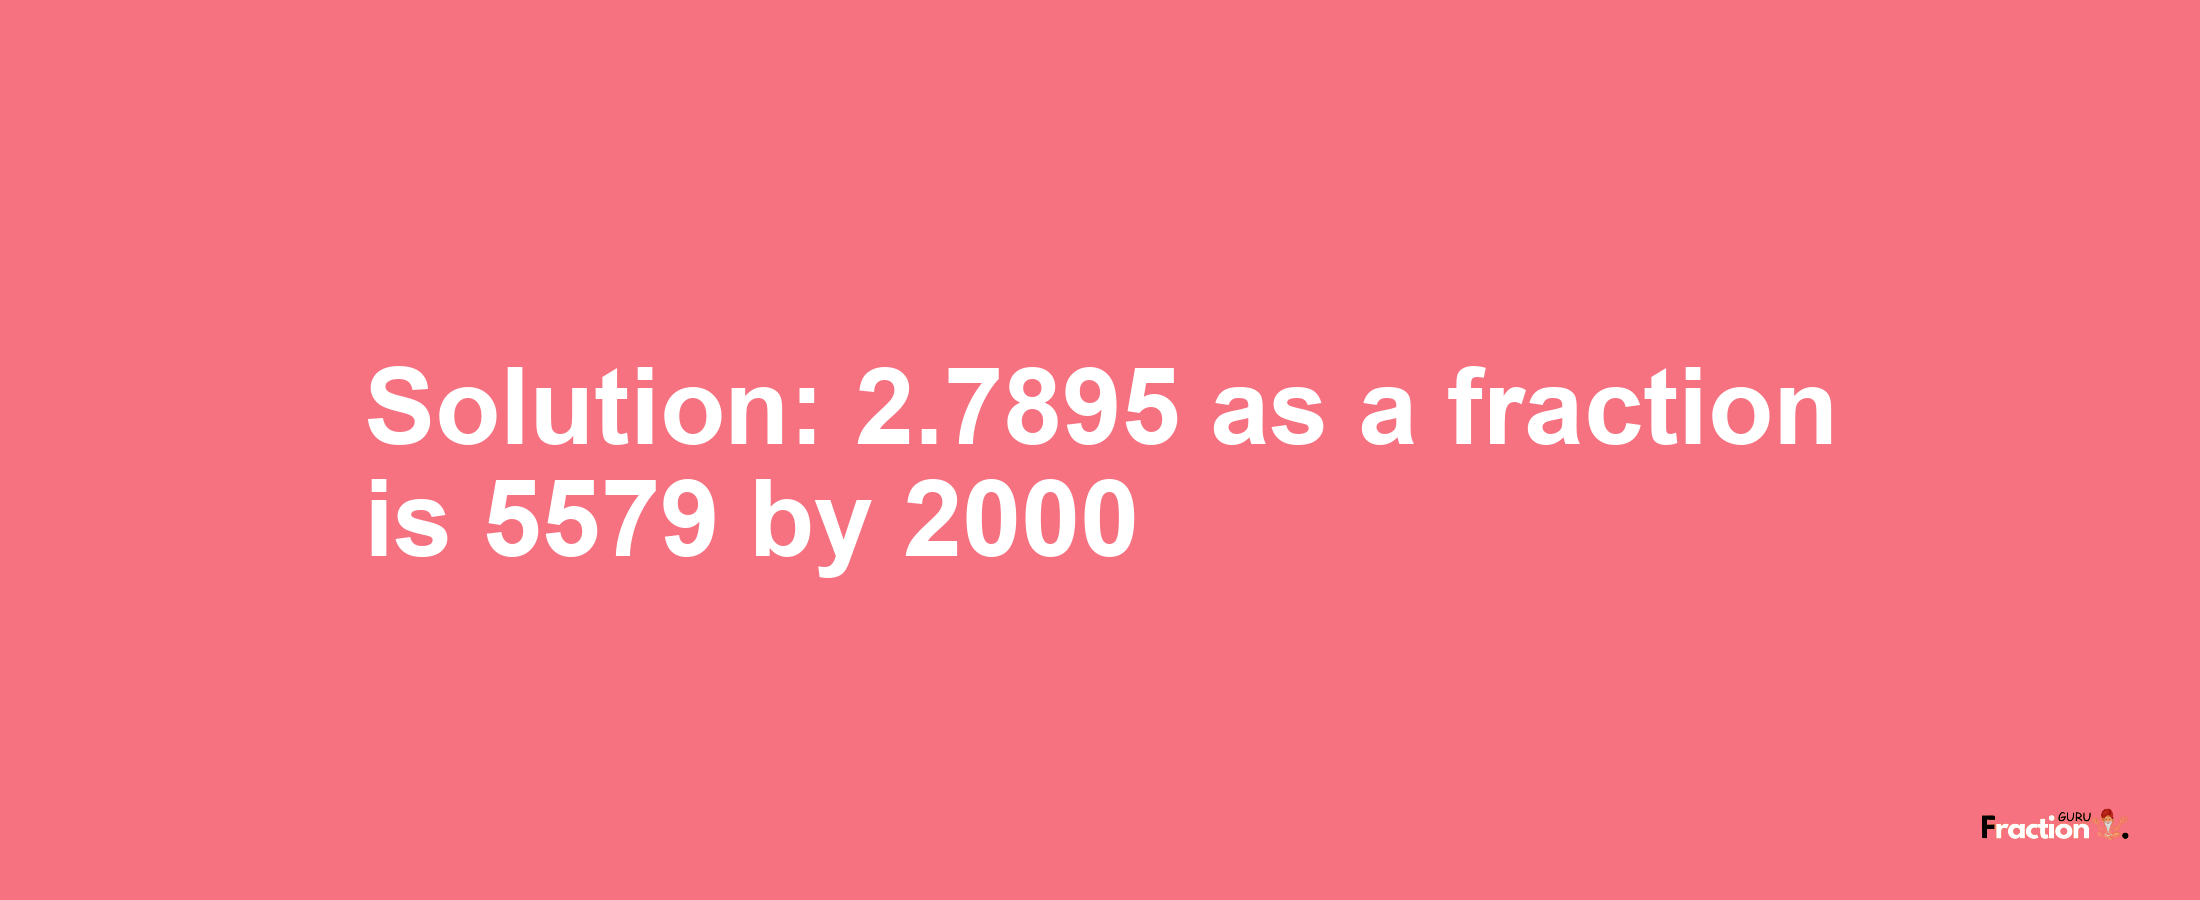 Solution:2.7895 as a fraction is 5579/2000